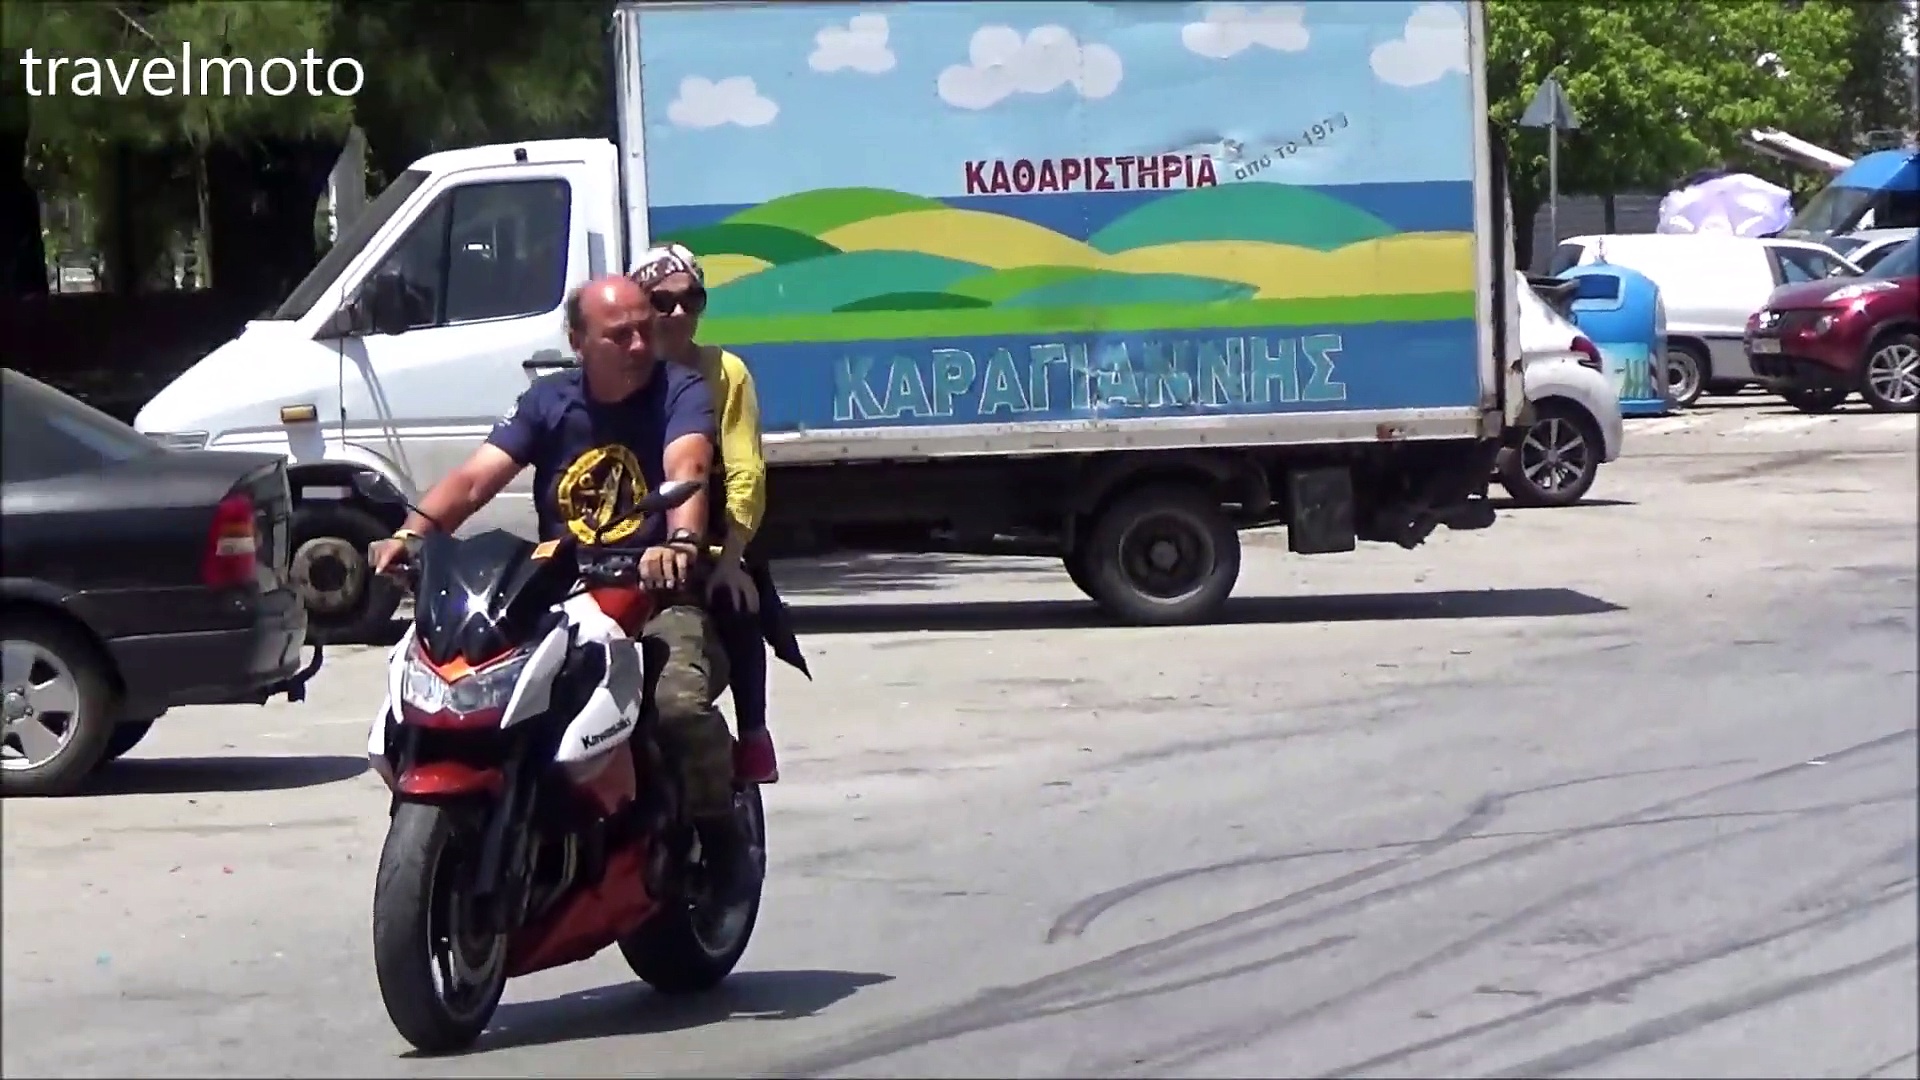 Motorcycles in Greece